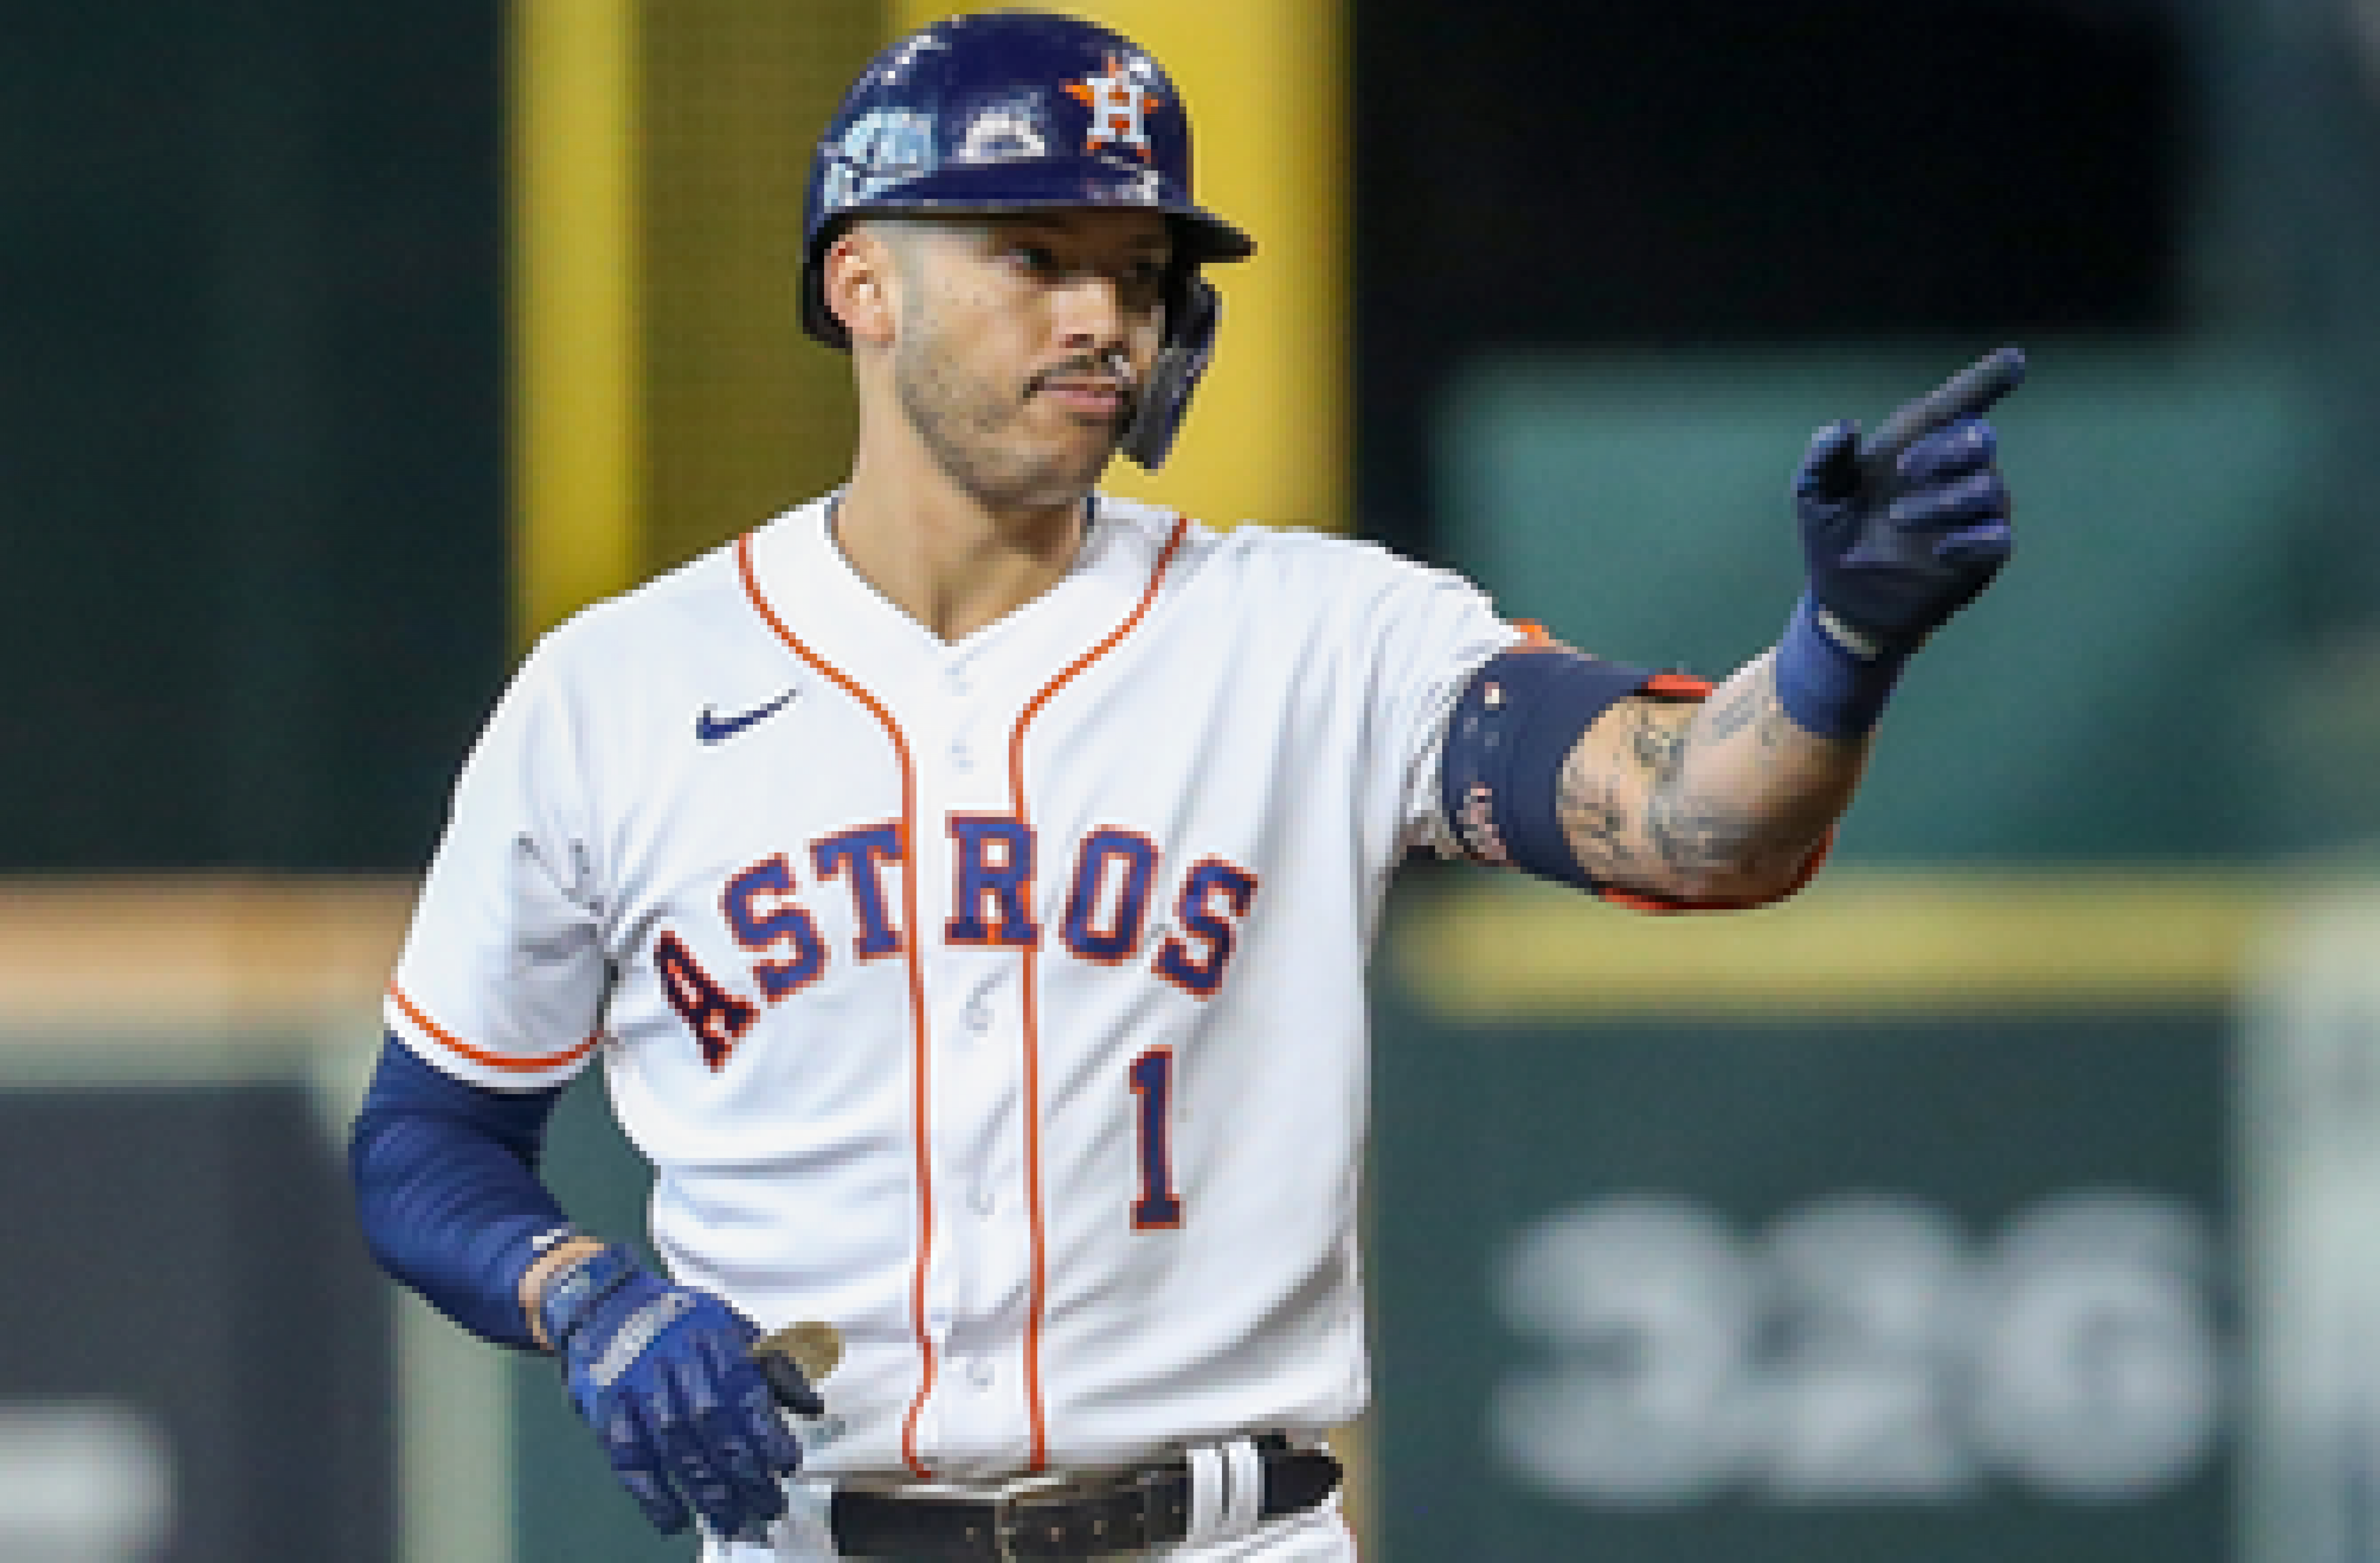 Carlos Correa goes 2-for-5 with a RBI as Astros handle Rockies, 5-1